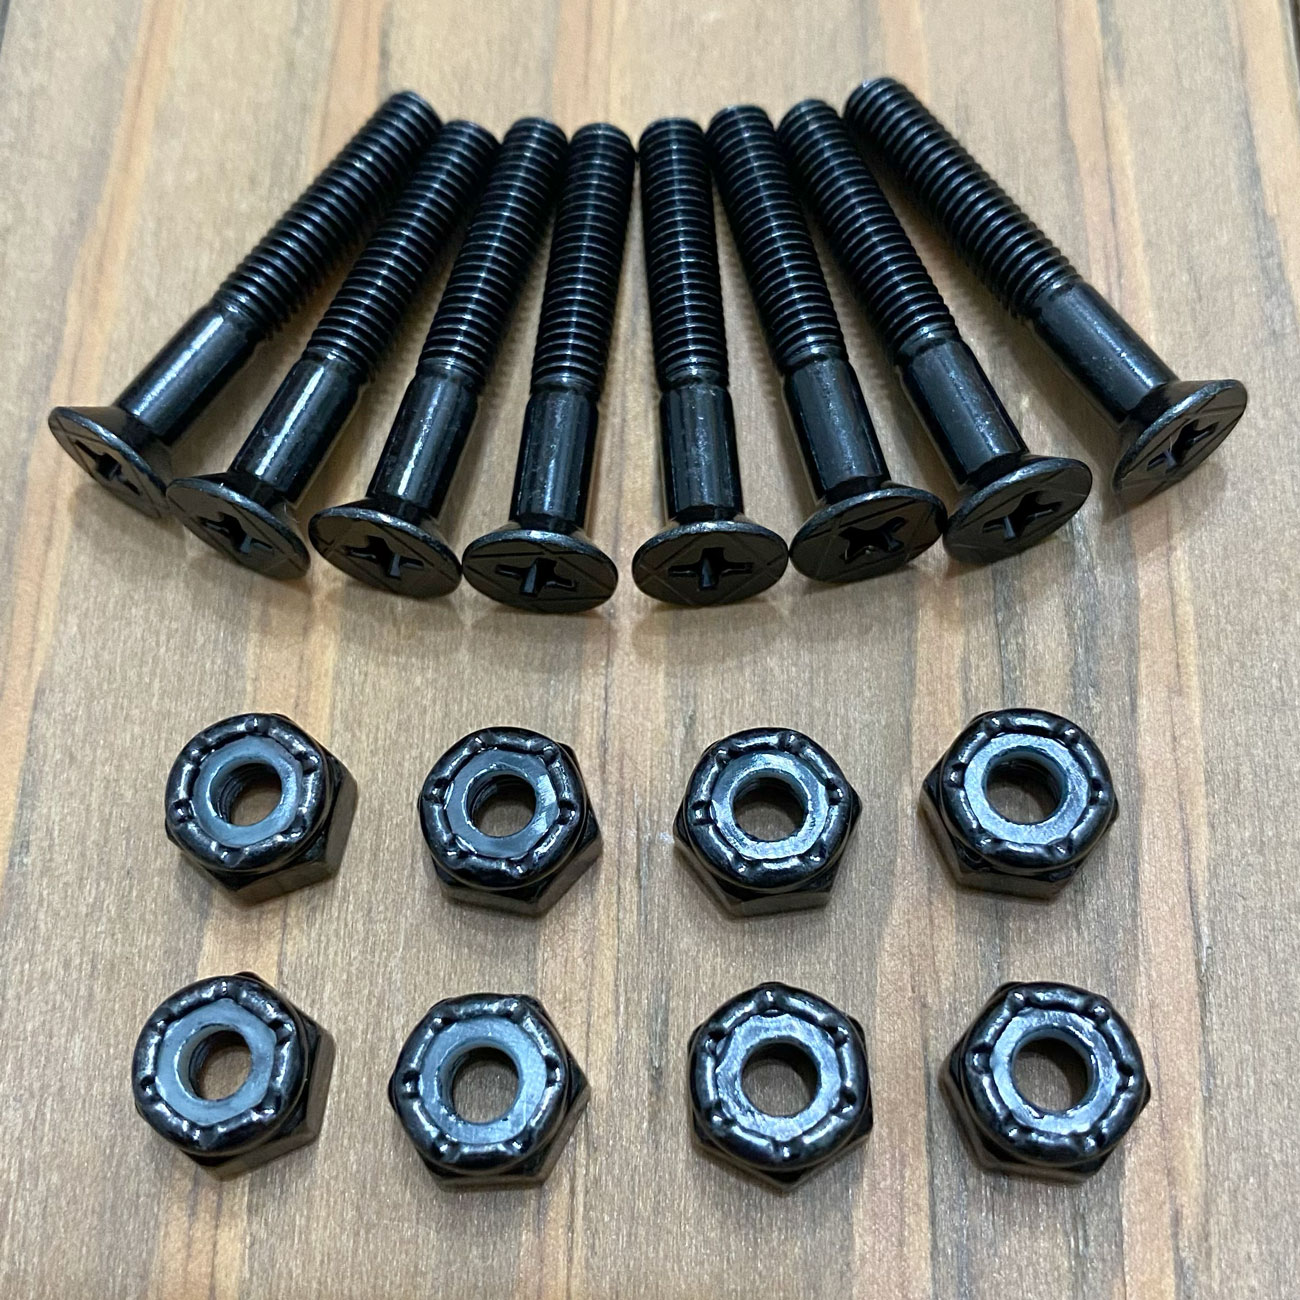 【1 1/4inch】INDEPENDENT PRECISION BOLTS